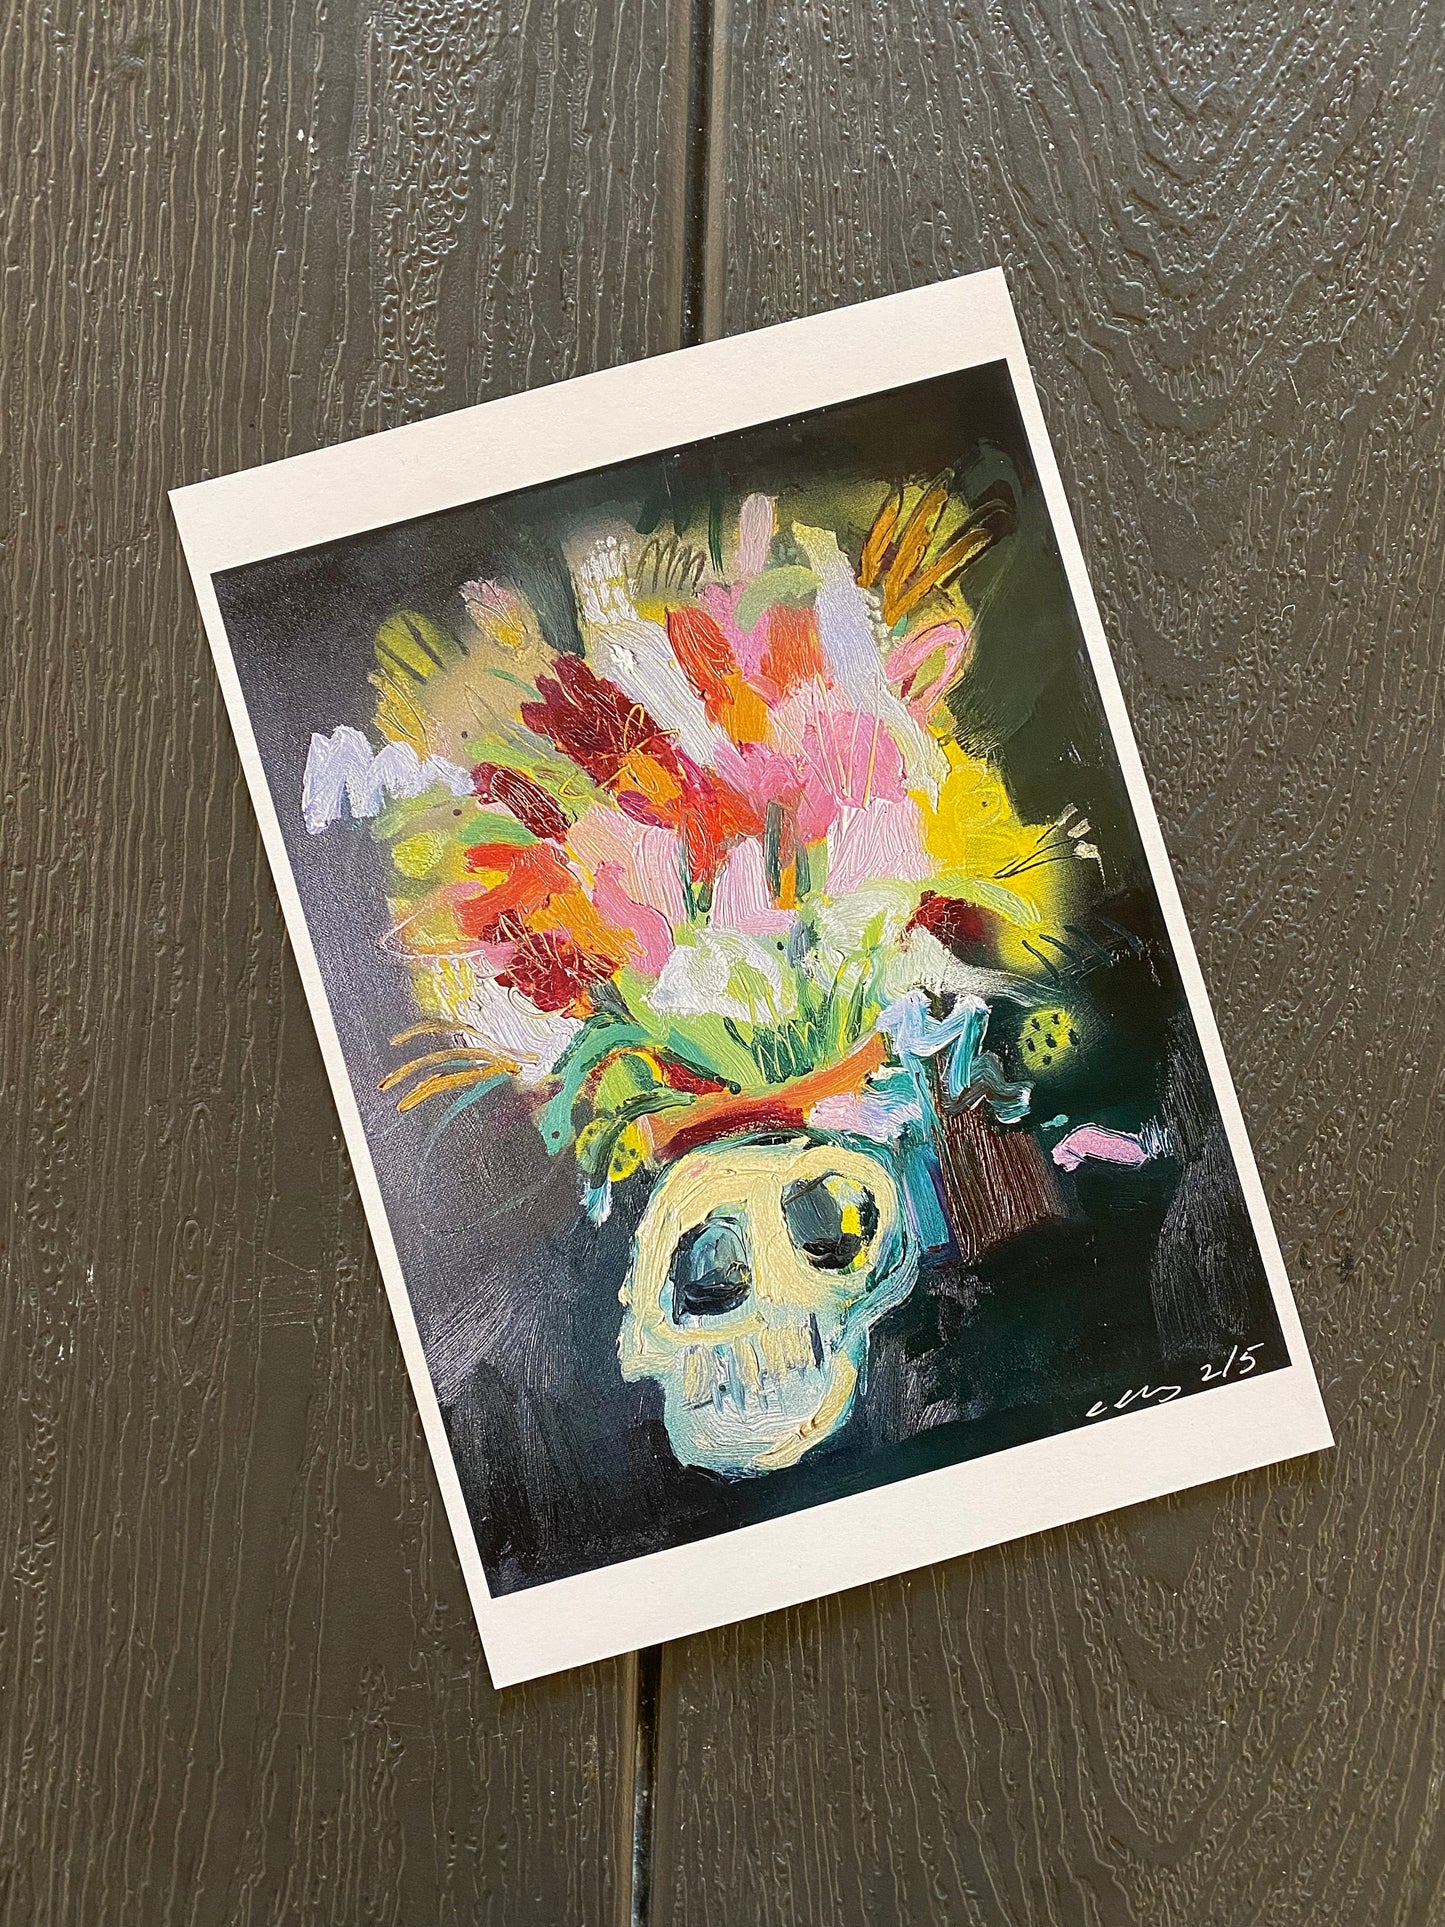 ‘Skull & Flowers’ Limited Edition Print